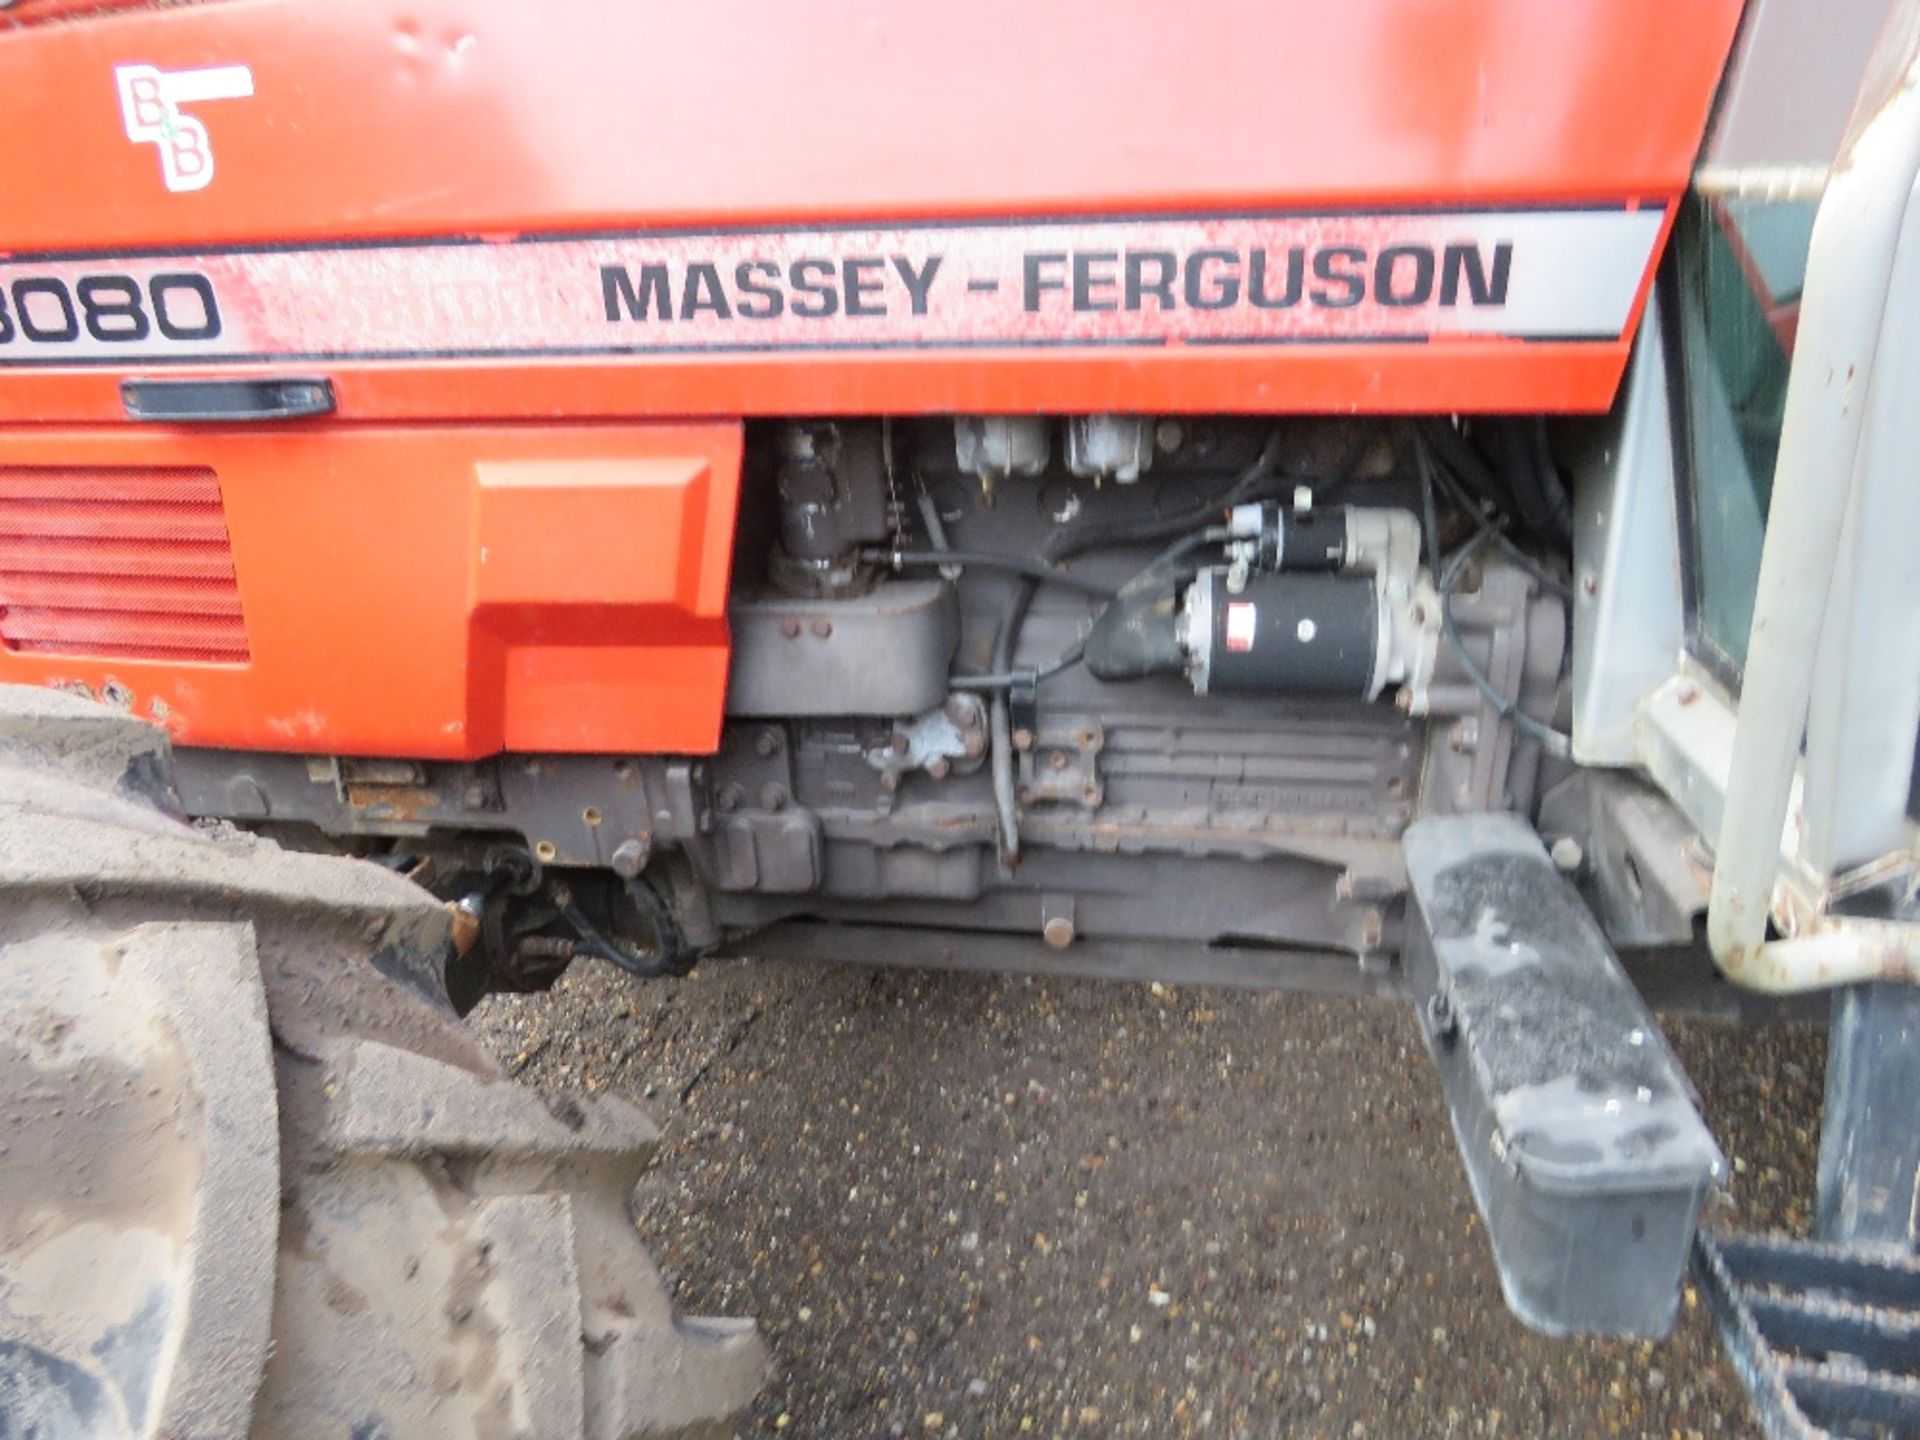 MASSEY FERGUSON 3080 4WD TRACTOR REG:H786 LFA (V5 TO APPLY FOR), 7165 REC HOURS. WHEN TESTED THIS M - Image 3 of 11